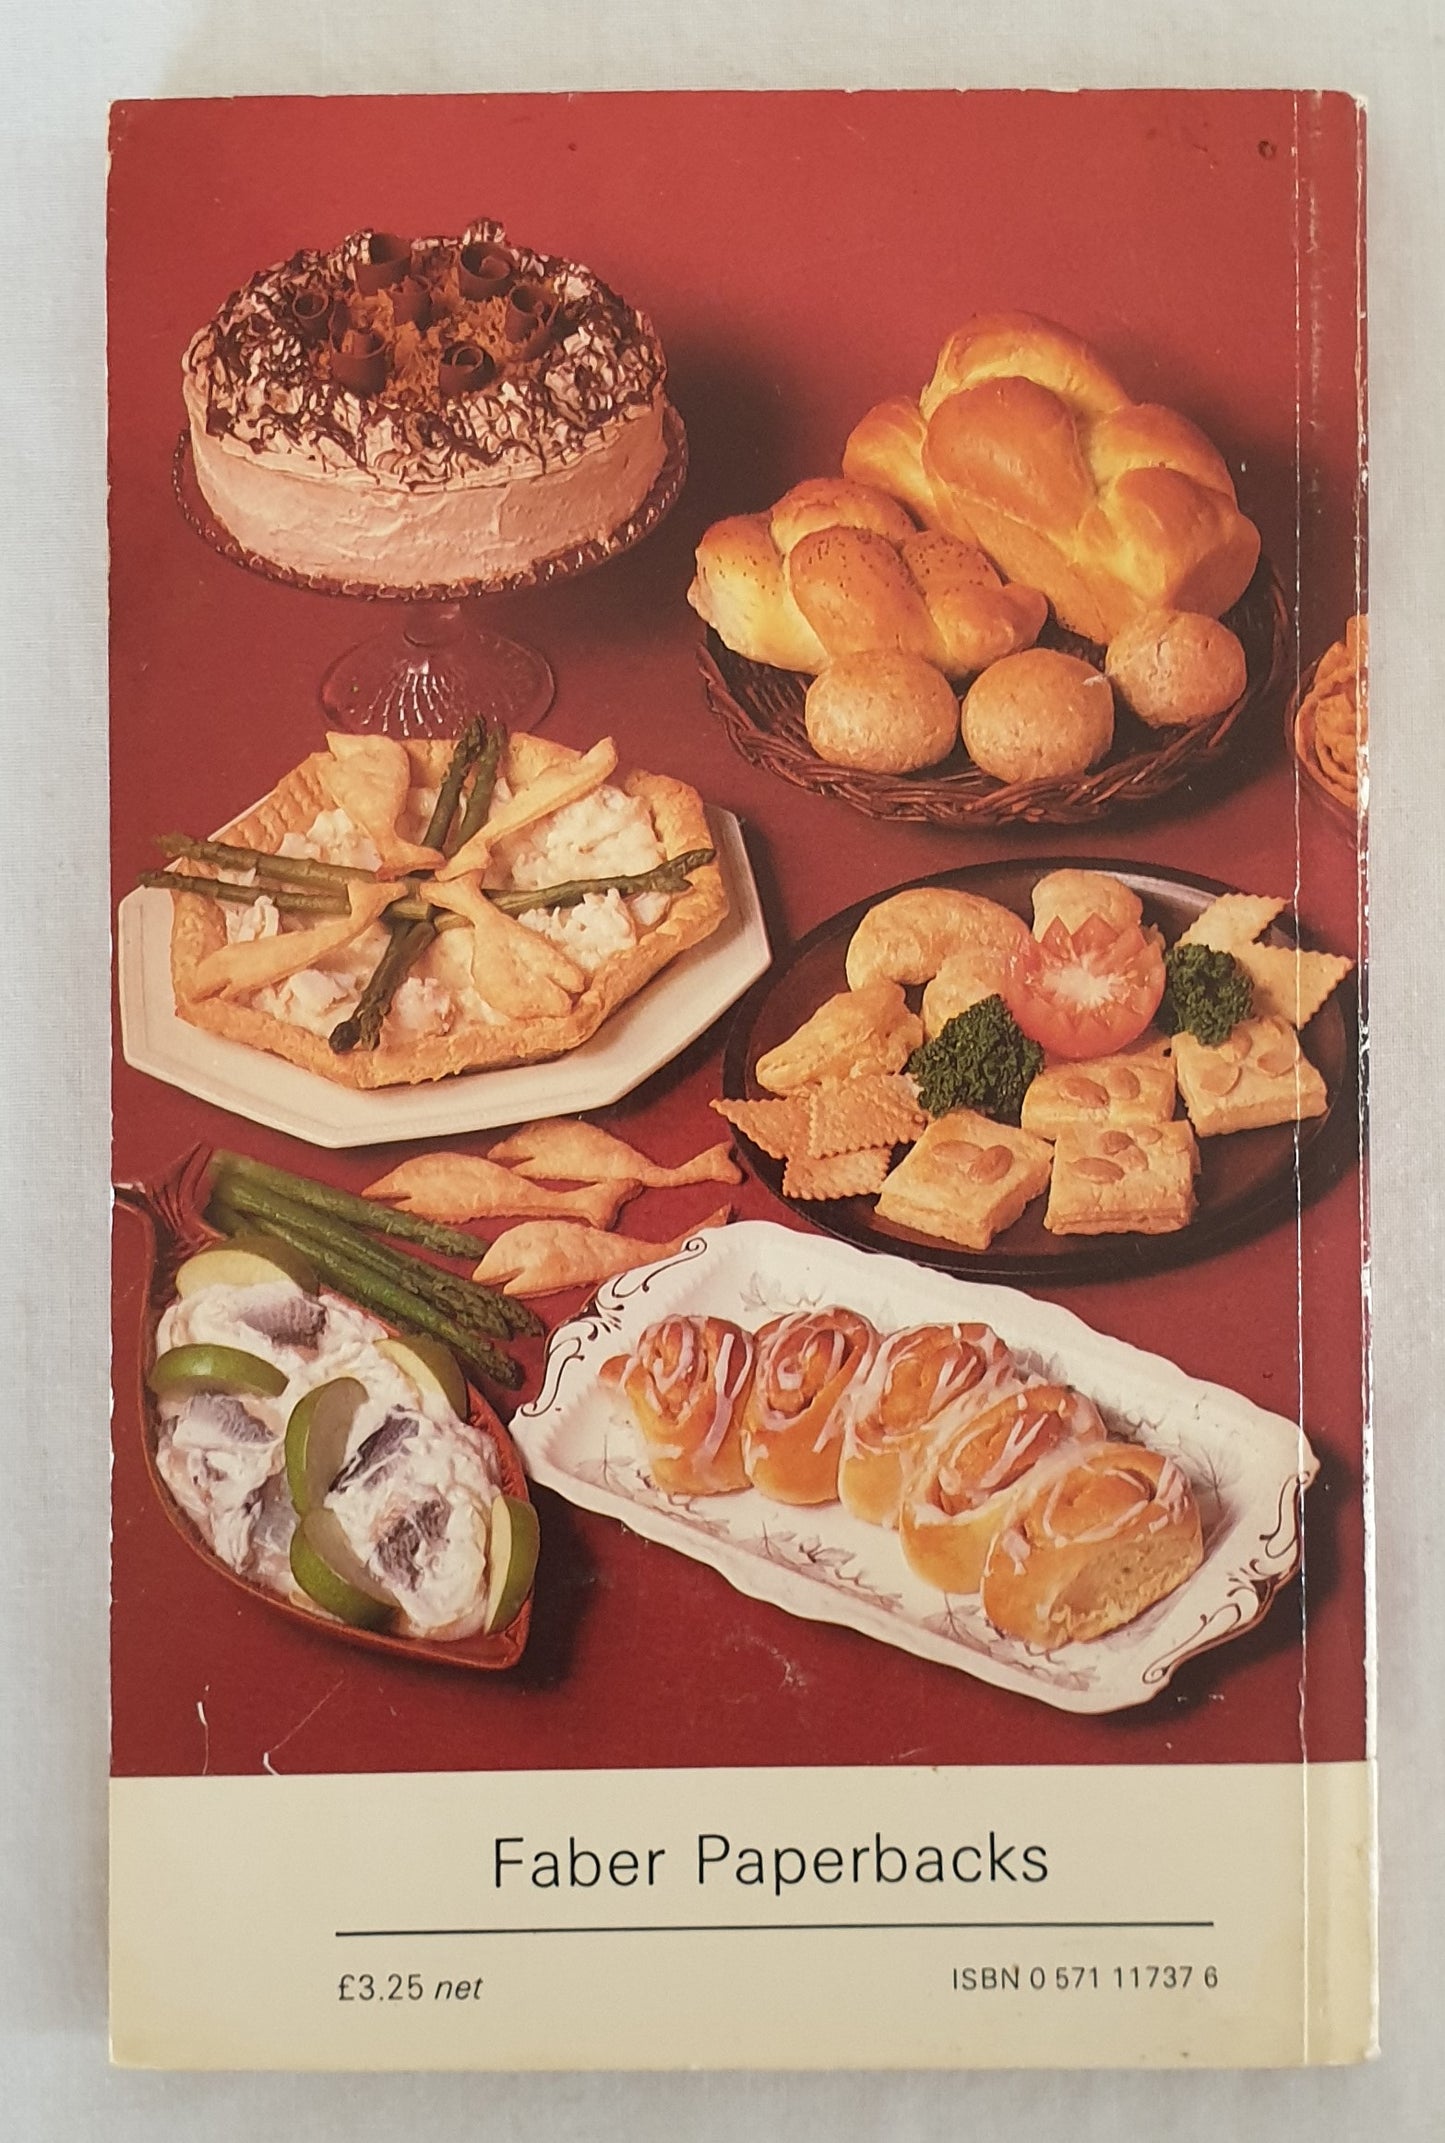 The Home Book of Jewish Cookery by Judy Jackson